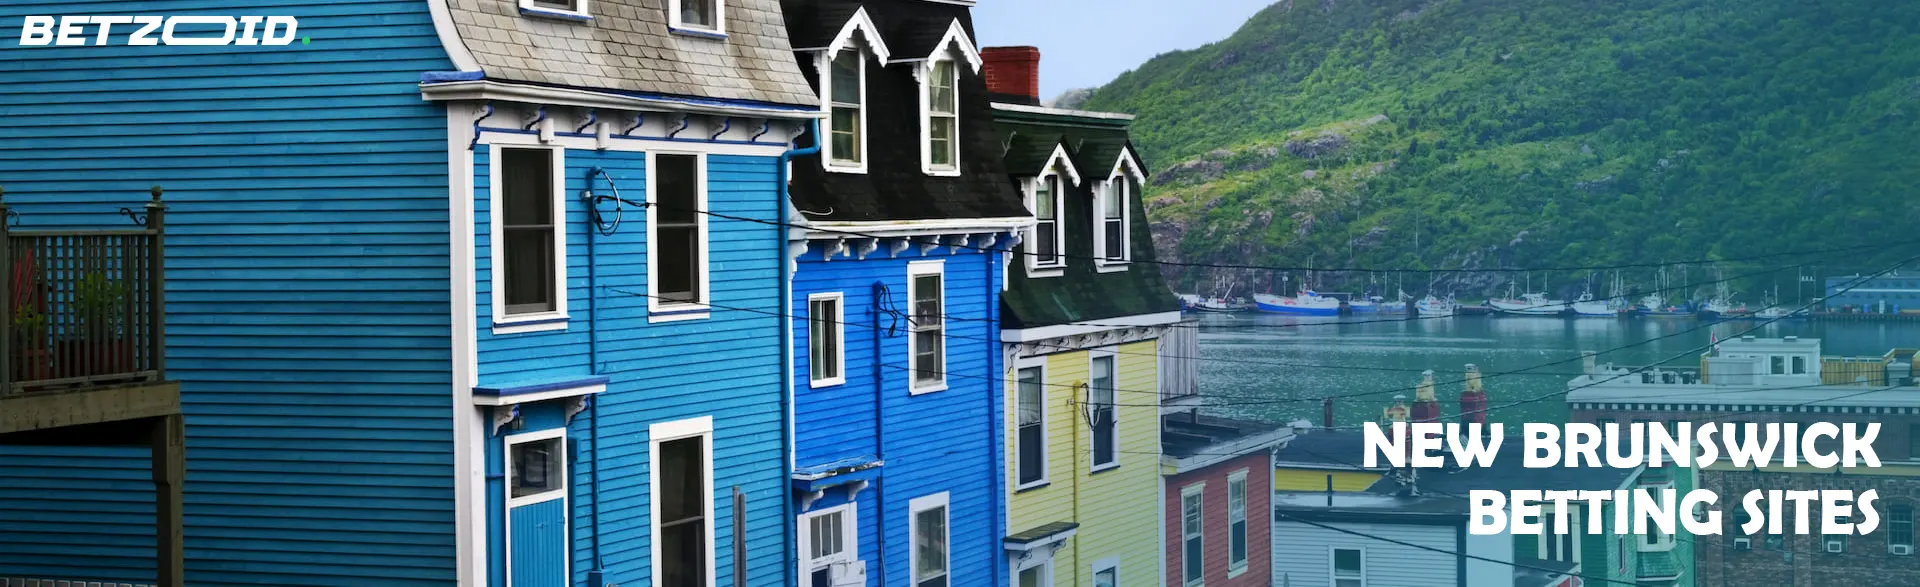 Colorful houses near the waterfront in New Brunswick, symbolizing New Brunswick betting sites.